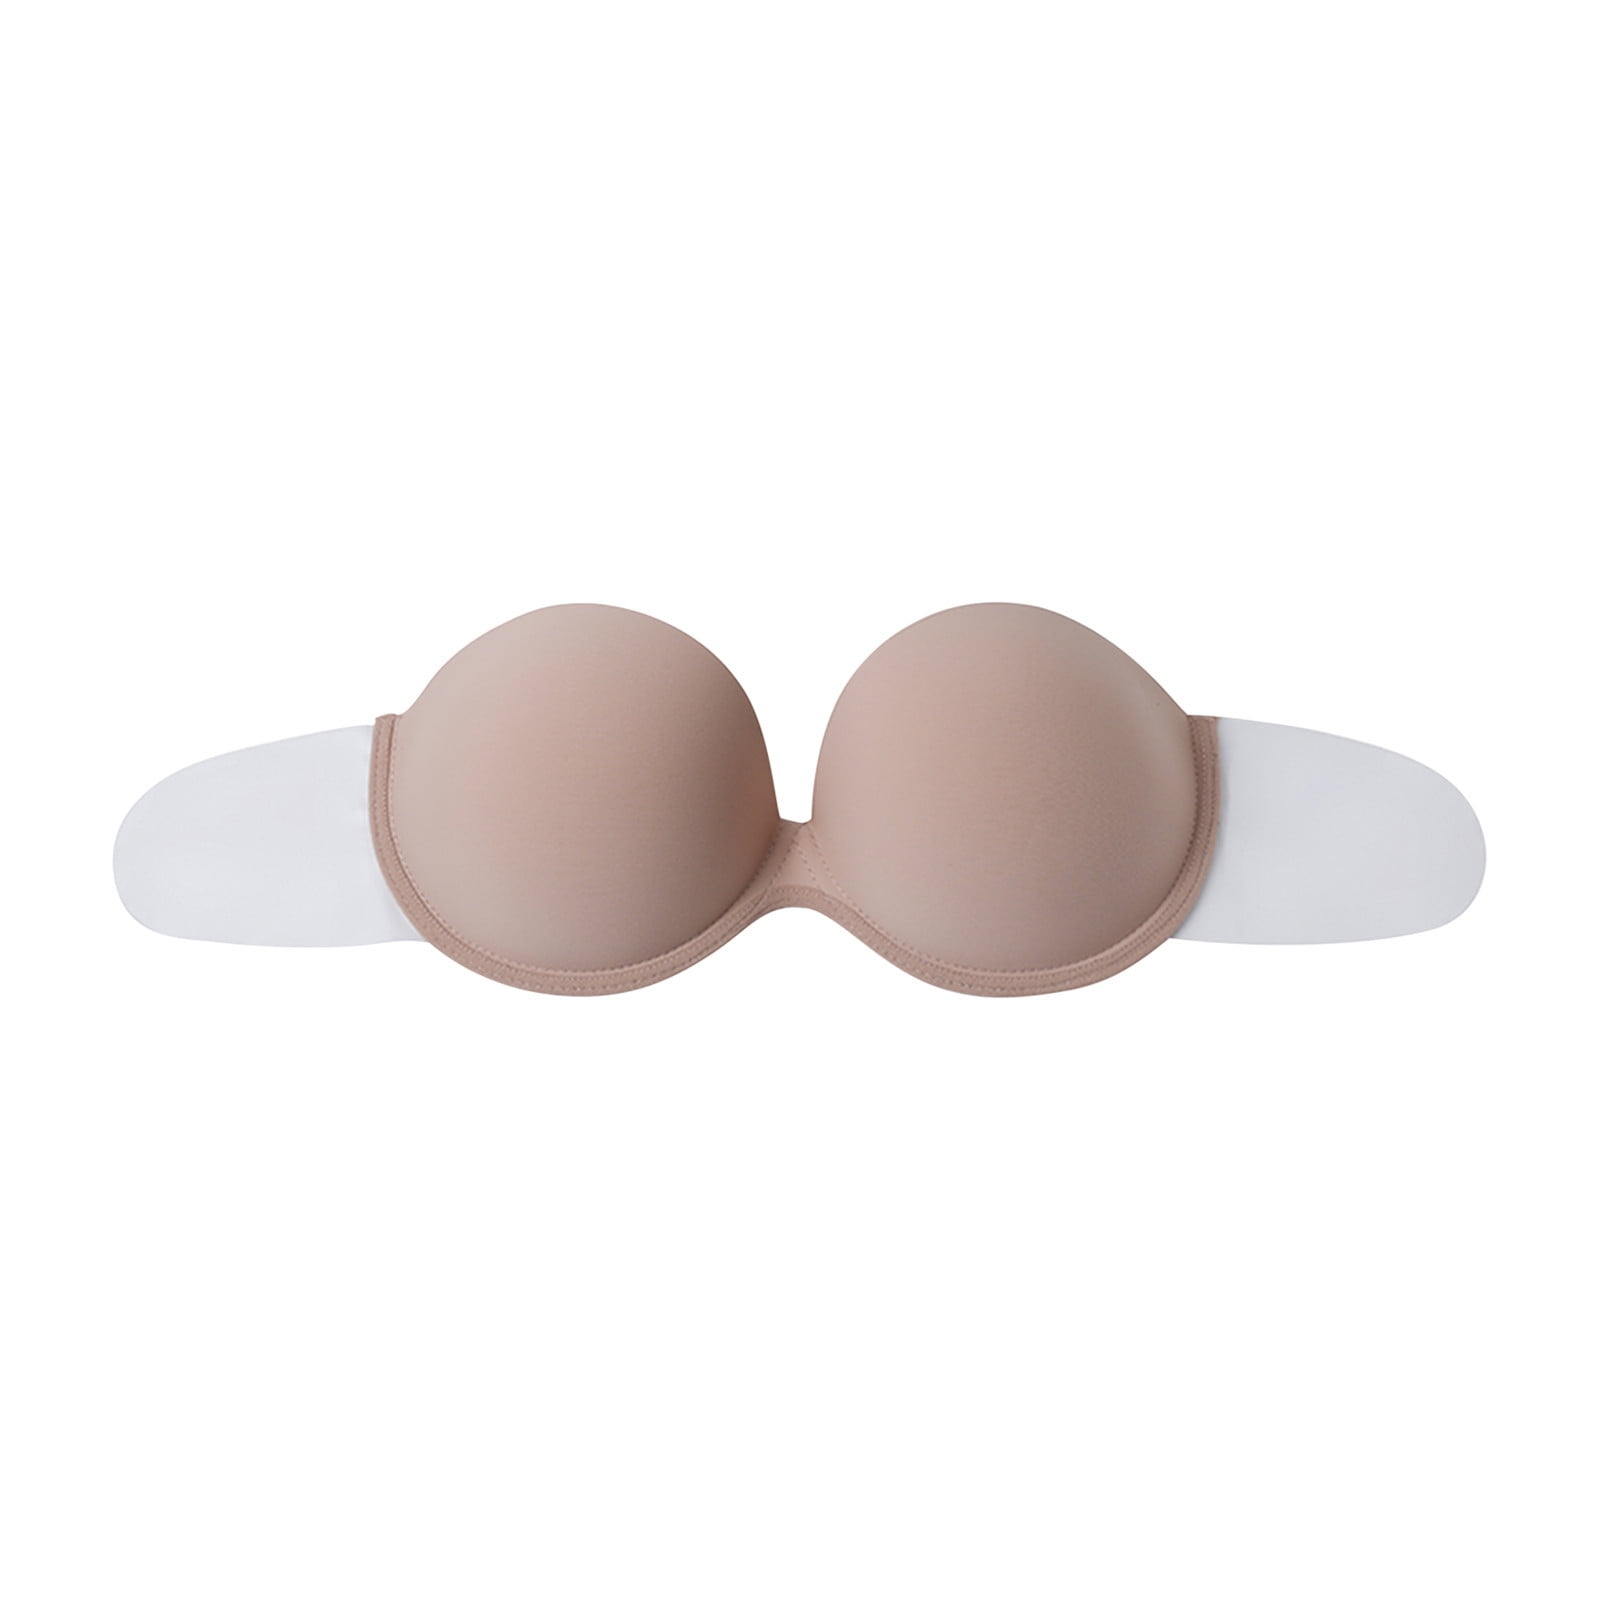 Womens Silicone Self Adhesive Strapless Push Up Bra, Seamless Invisible Bra  With Rabbit Ears For Wedding From Fashion_show2017, $1.73